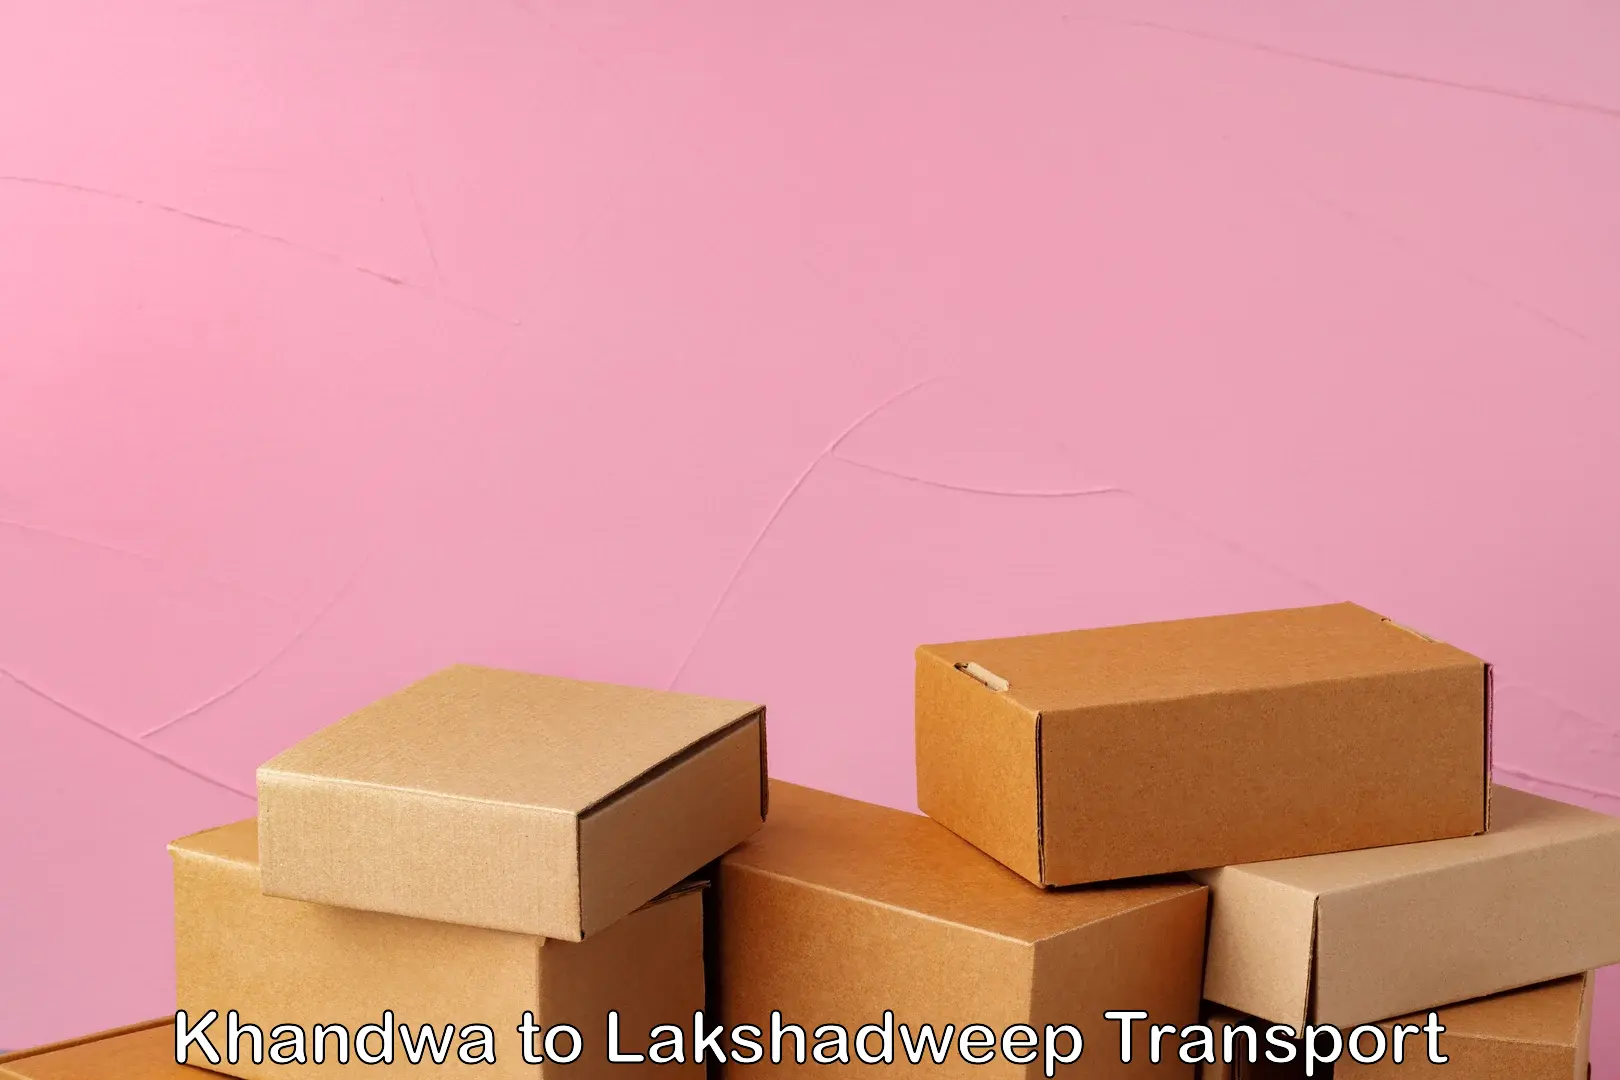 Daily parcel service transport Khandwa to Lakshadweep